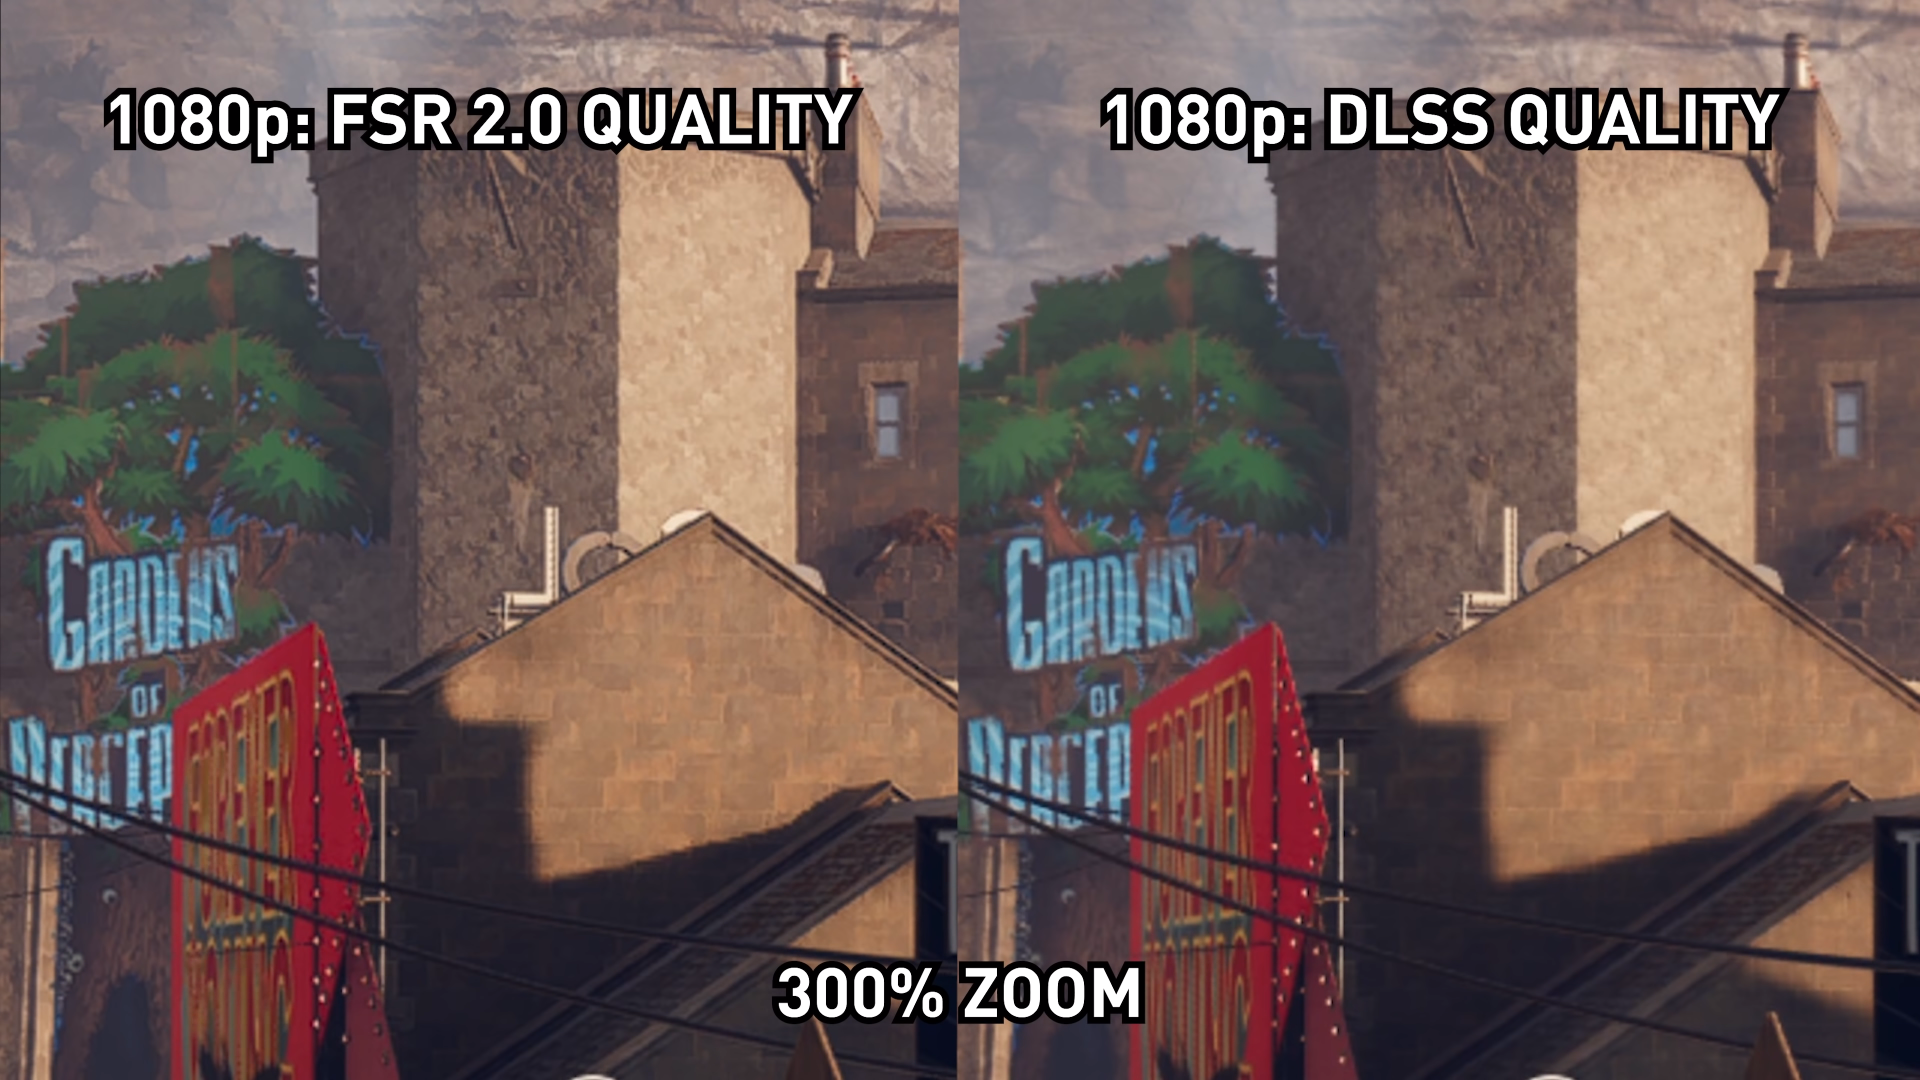 AMD FSR compared to Nvidia's DLSS in 1080P Upscaling, zoomed in 